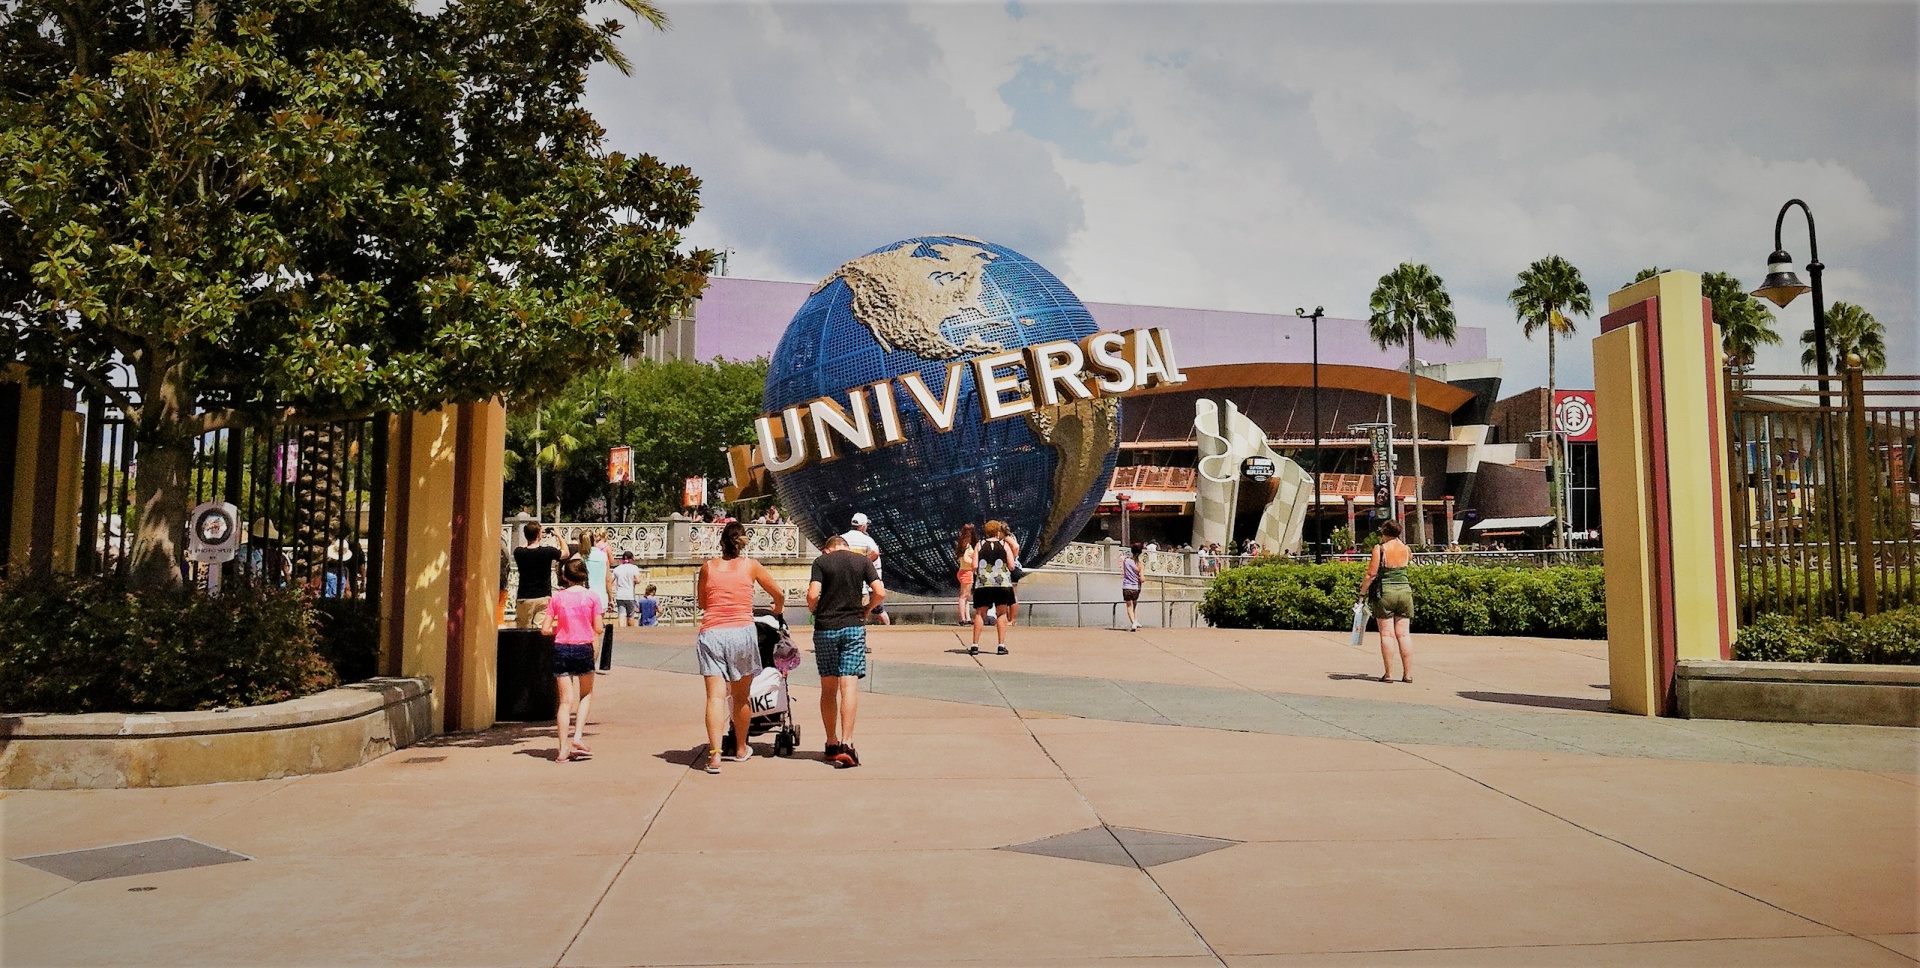 <p>Though it’s often compared to Walt Disney World, many people say that <strong>Universal Studios is the better of the two parks</strong>. </p>  <p>This massive park is full of rides and recreated sets inspired by popular movies and TV shows.</p>